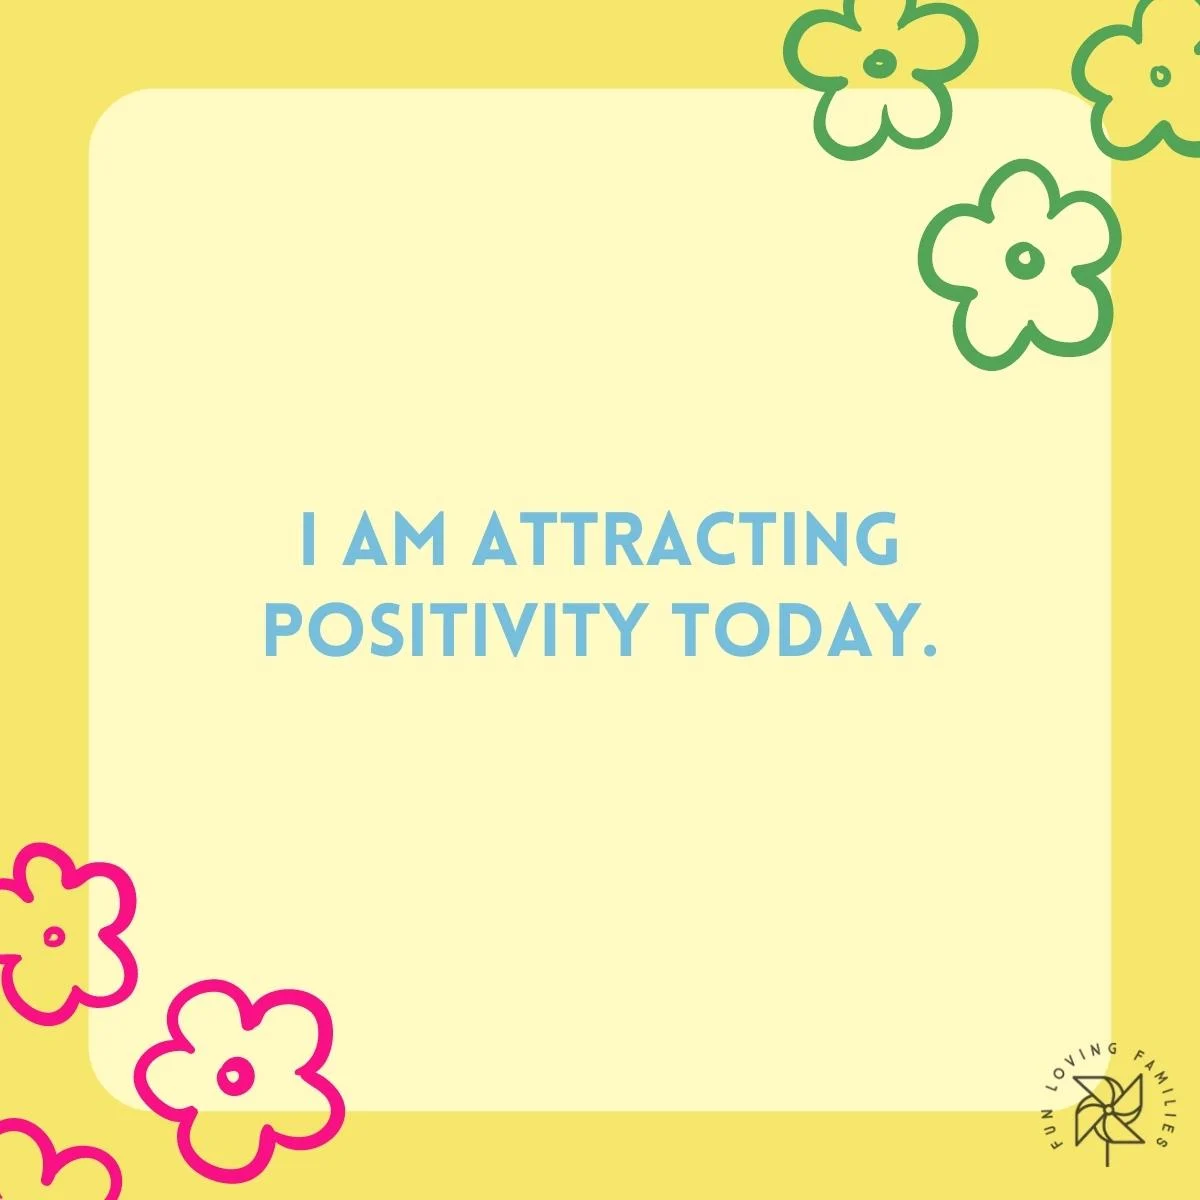 I am attracting positivity today affirmation image